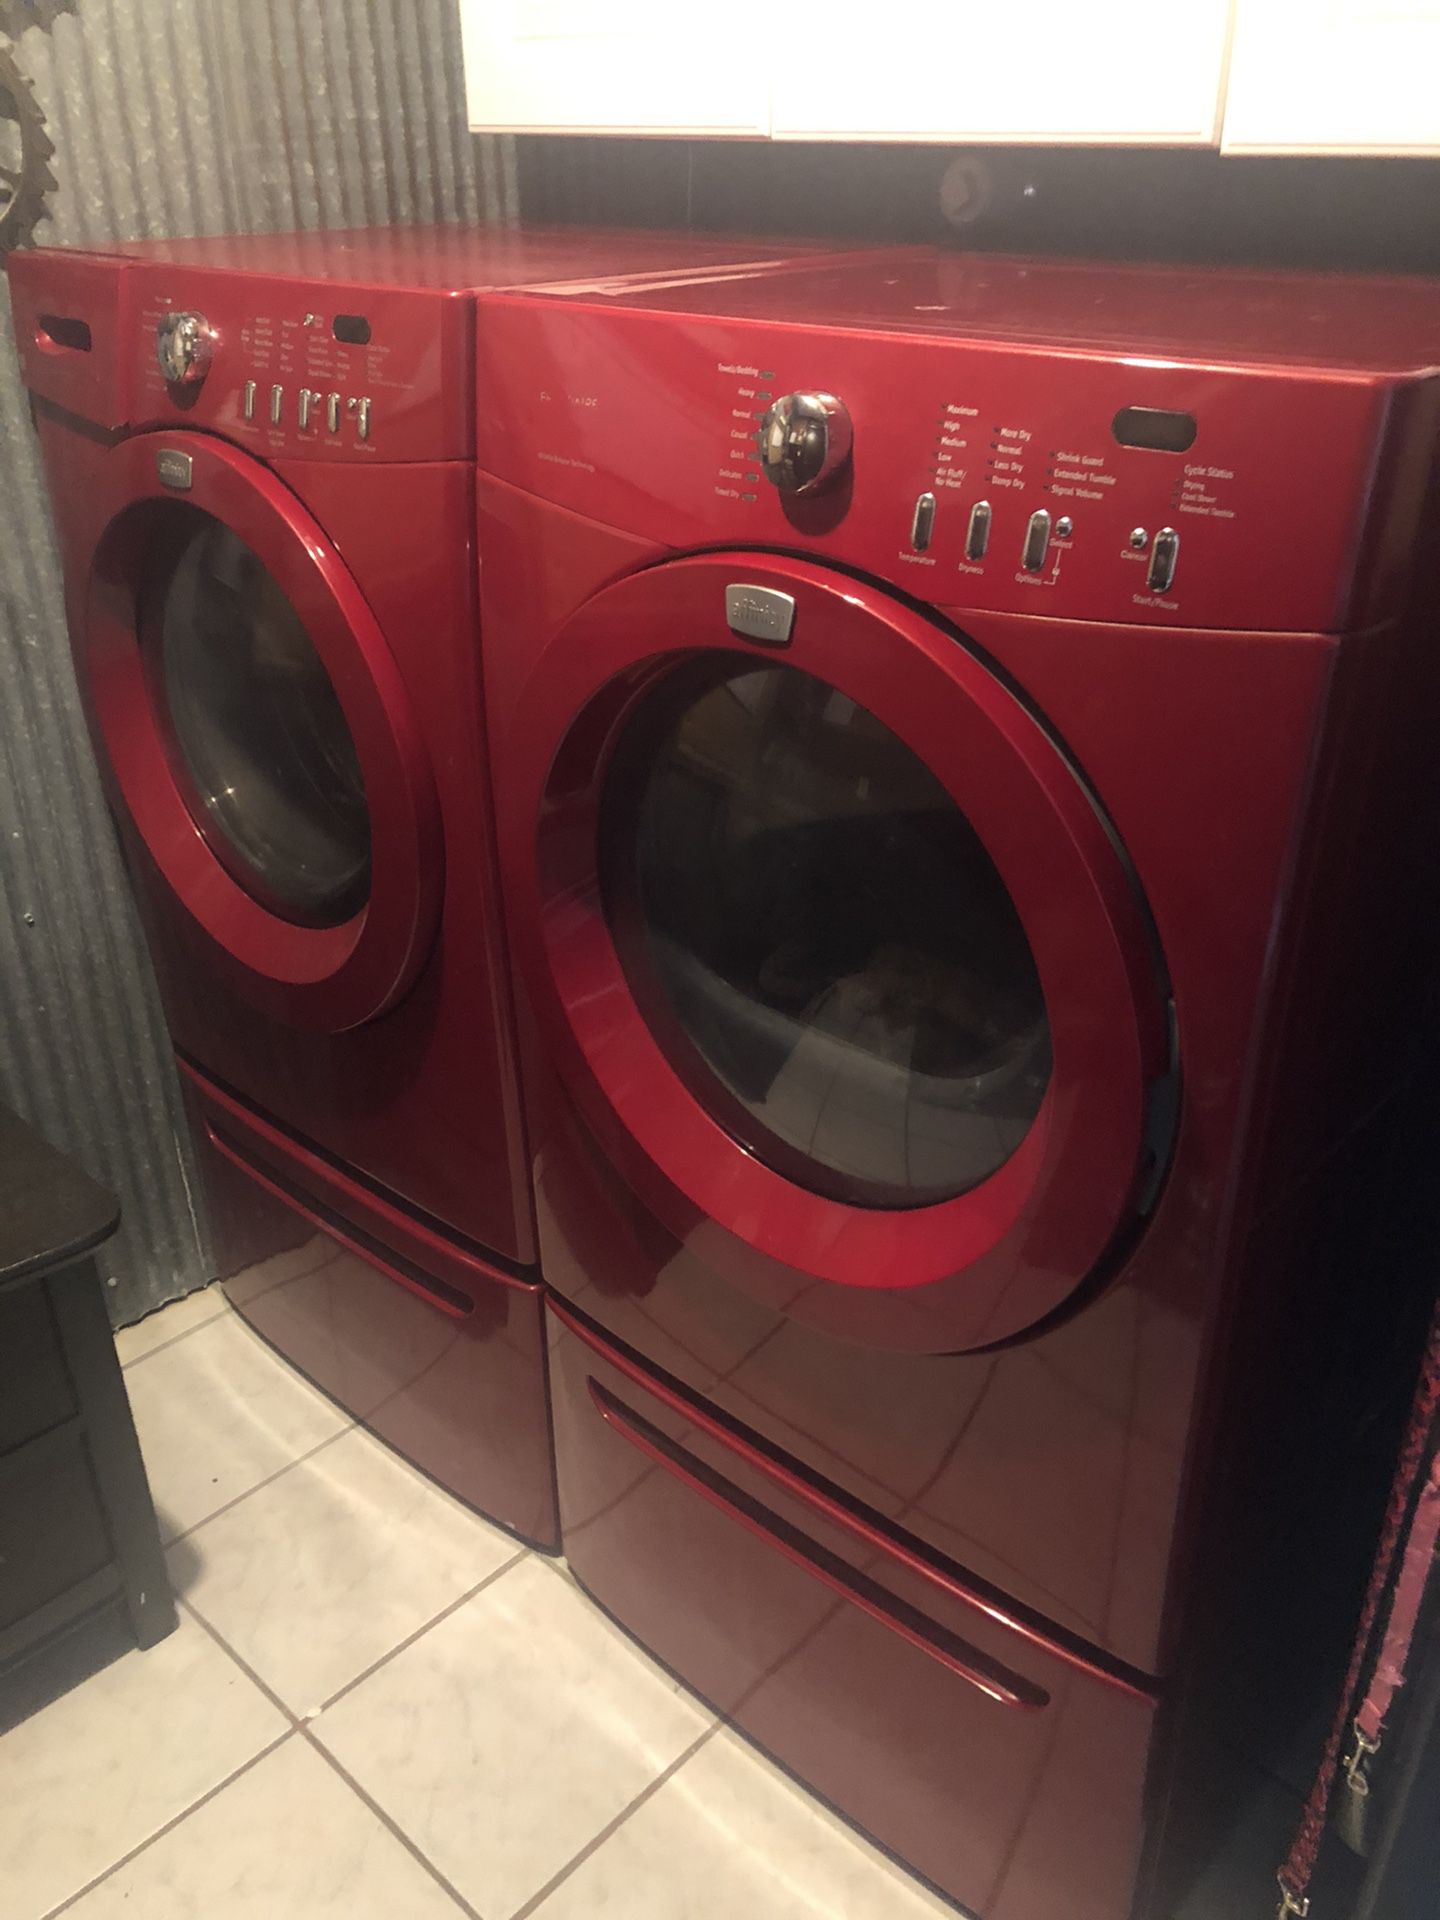 matching-washer-and-dryer-for-sale-in-tarpon-springs-fl-offerup